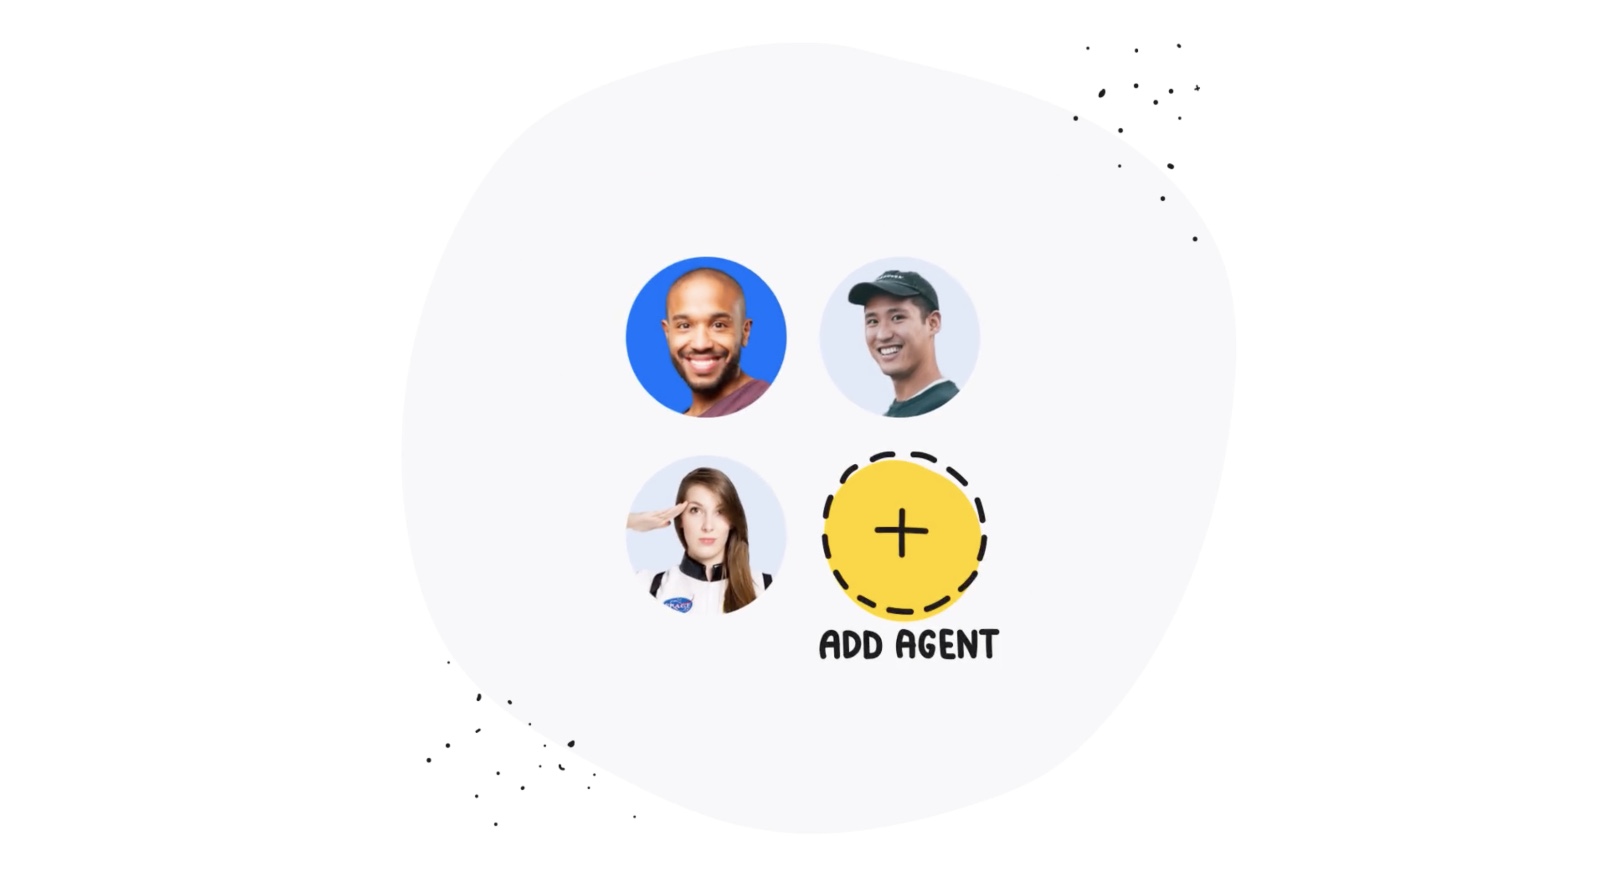 [New feature] Invite people to LiveChat accounts you manage